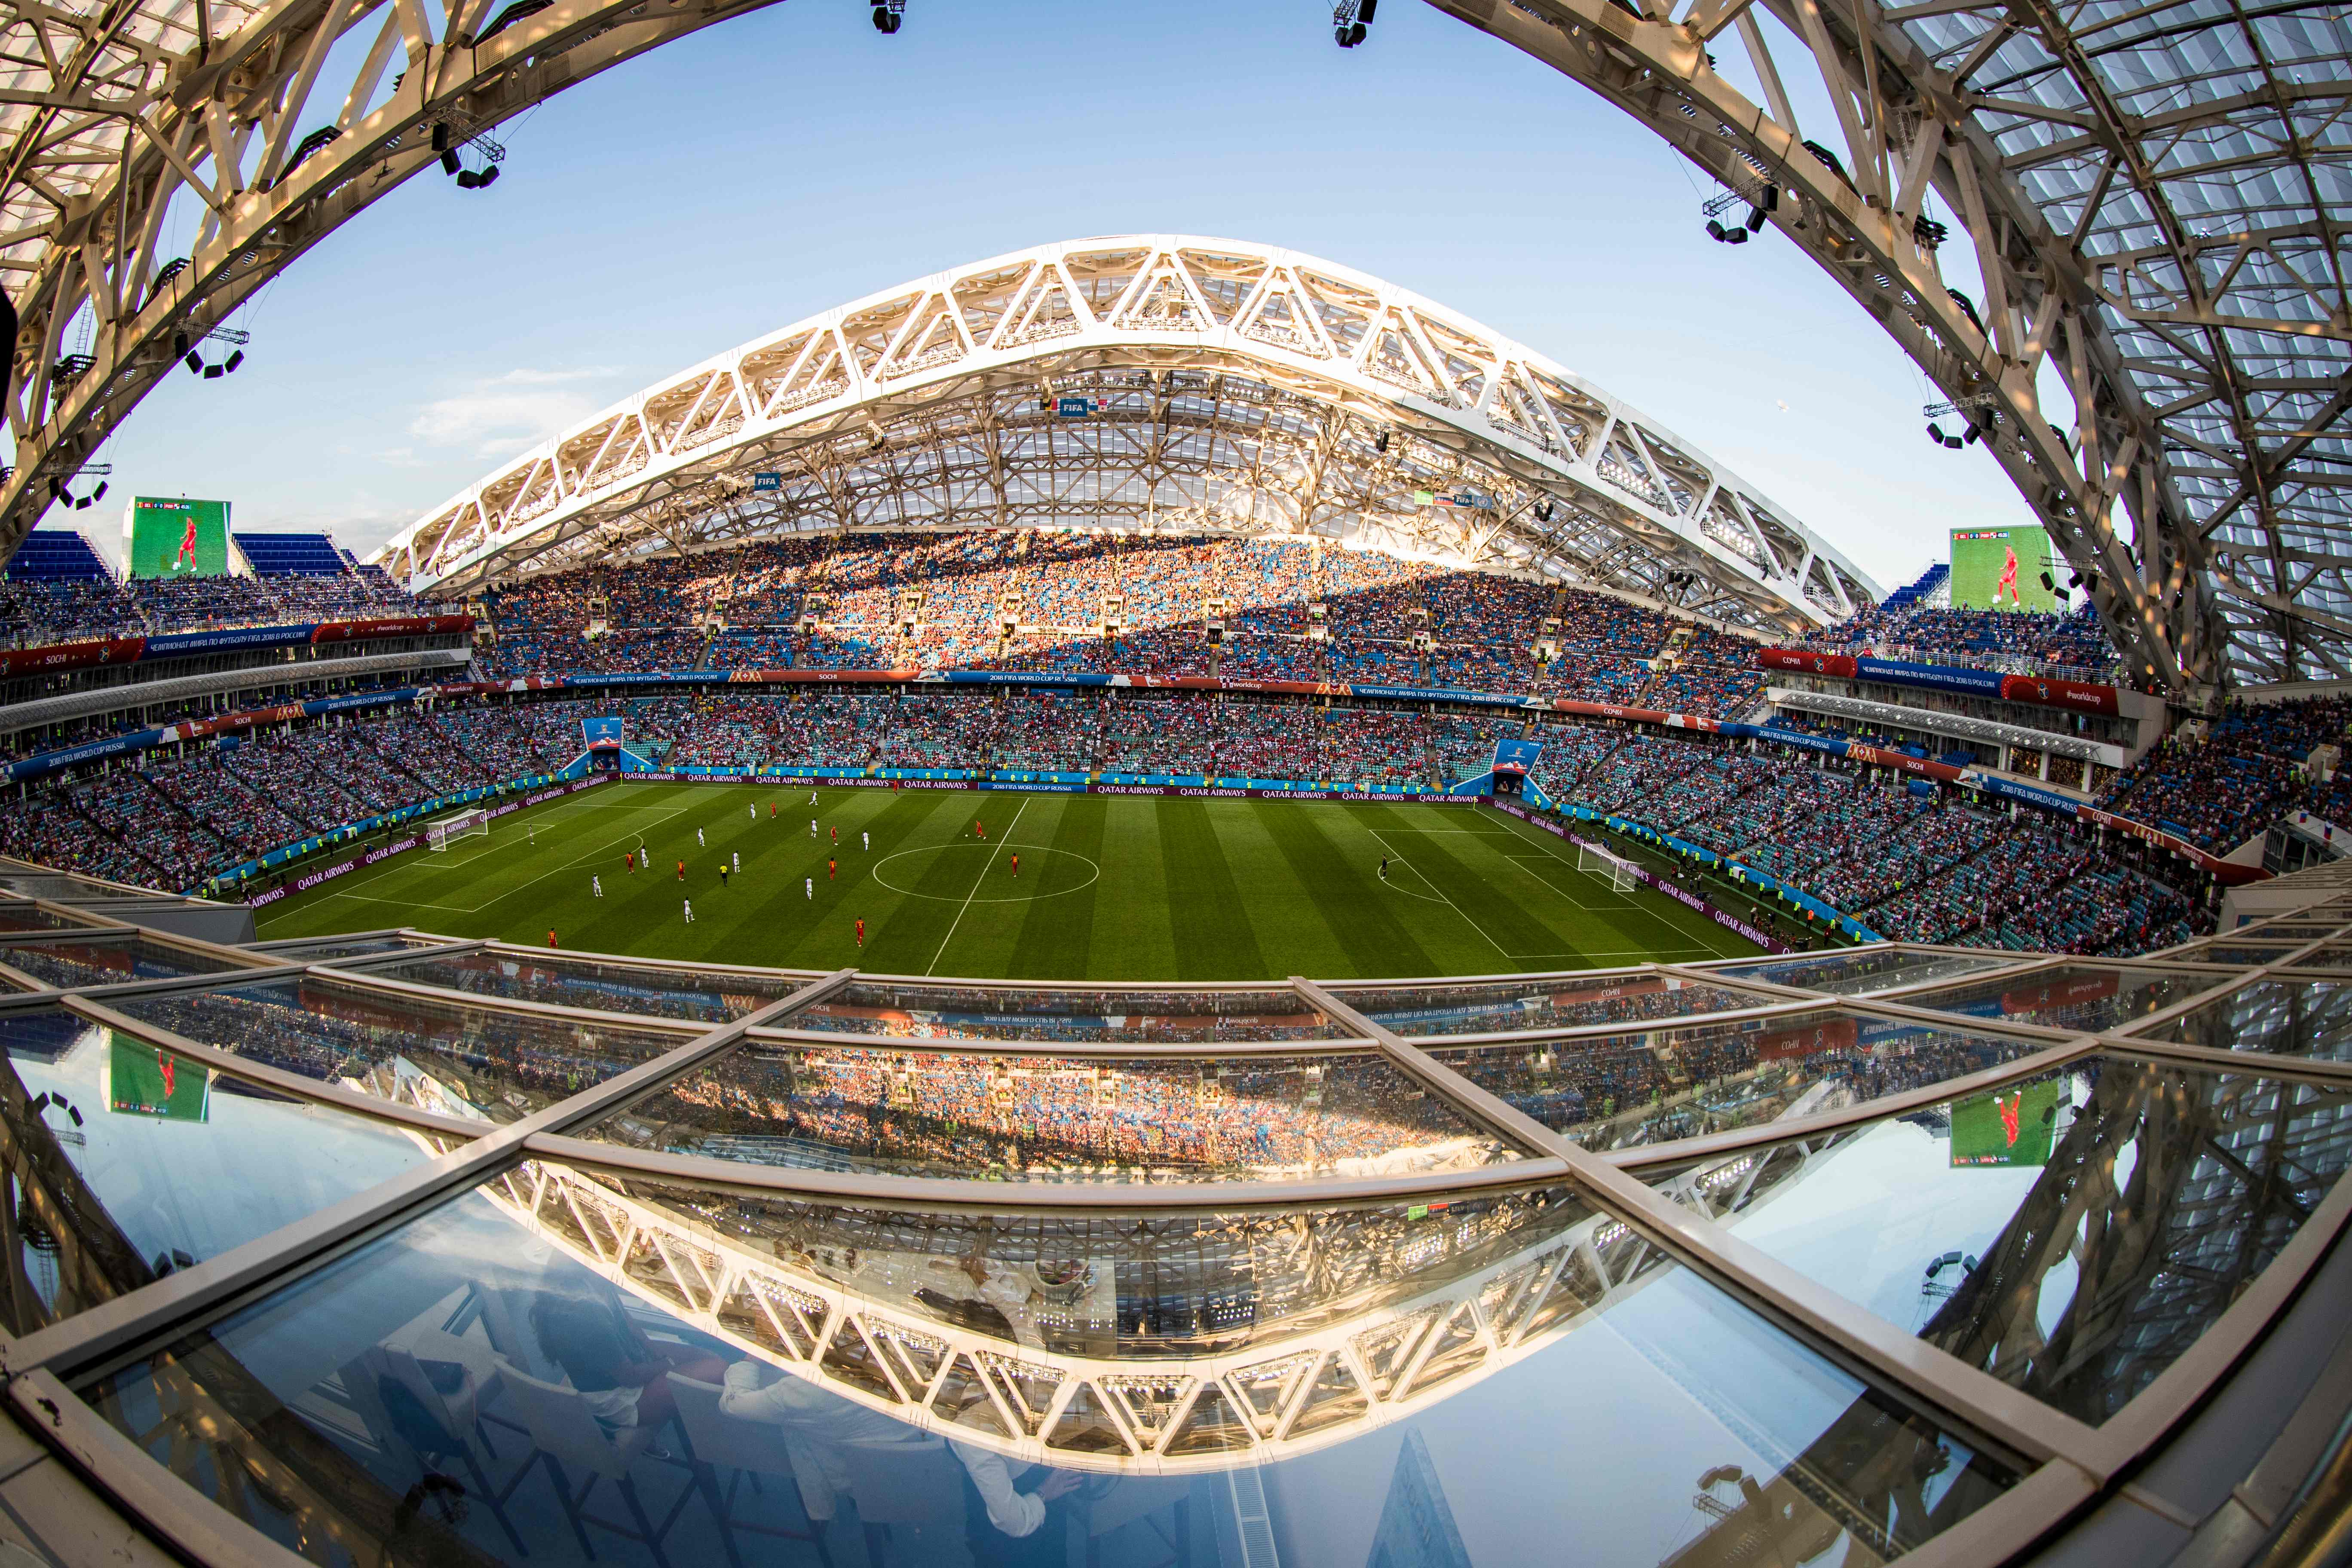 The opposite tribune is reflected in a glass roof during the Russia 2018 World Cup Group G football match between Belgium and Panama at the Fisht Stadium in Sochi on June 18, 2018.nA sensational volley by Dries Mertens and a Romelu Lukaku double fired classy Belgium to a 3-0 win against World Cup debutants Panama in Sochi. / AFP PHOTO / Odd ANDERSEN / RESTRICTED TO EDITORIAL USE - NO MOBILE PUSH ALERTS/DOWNLOADS